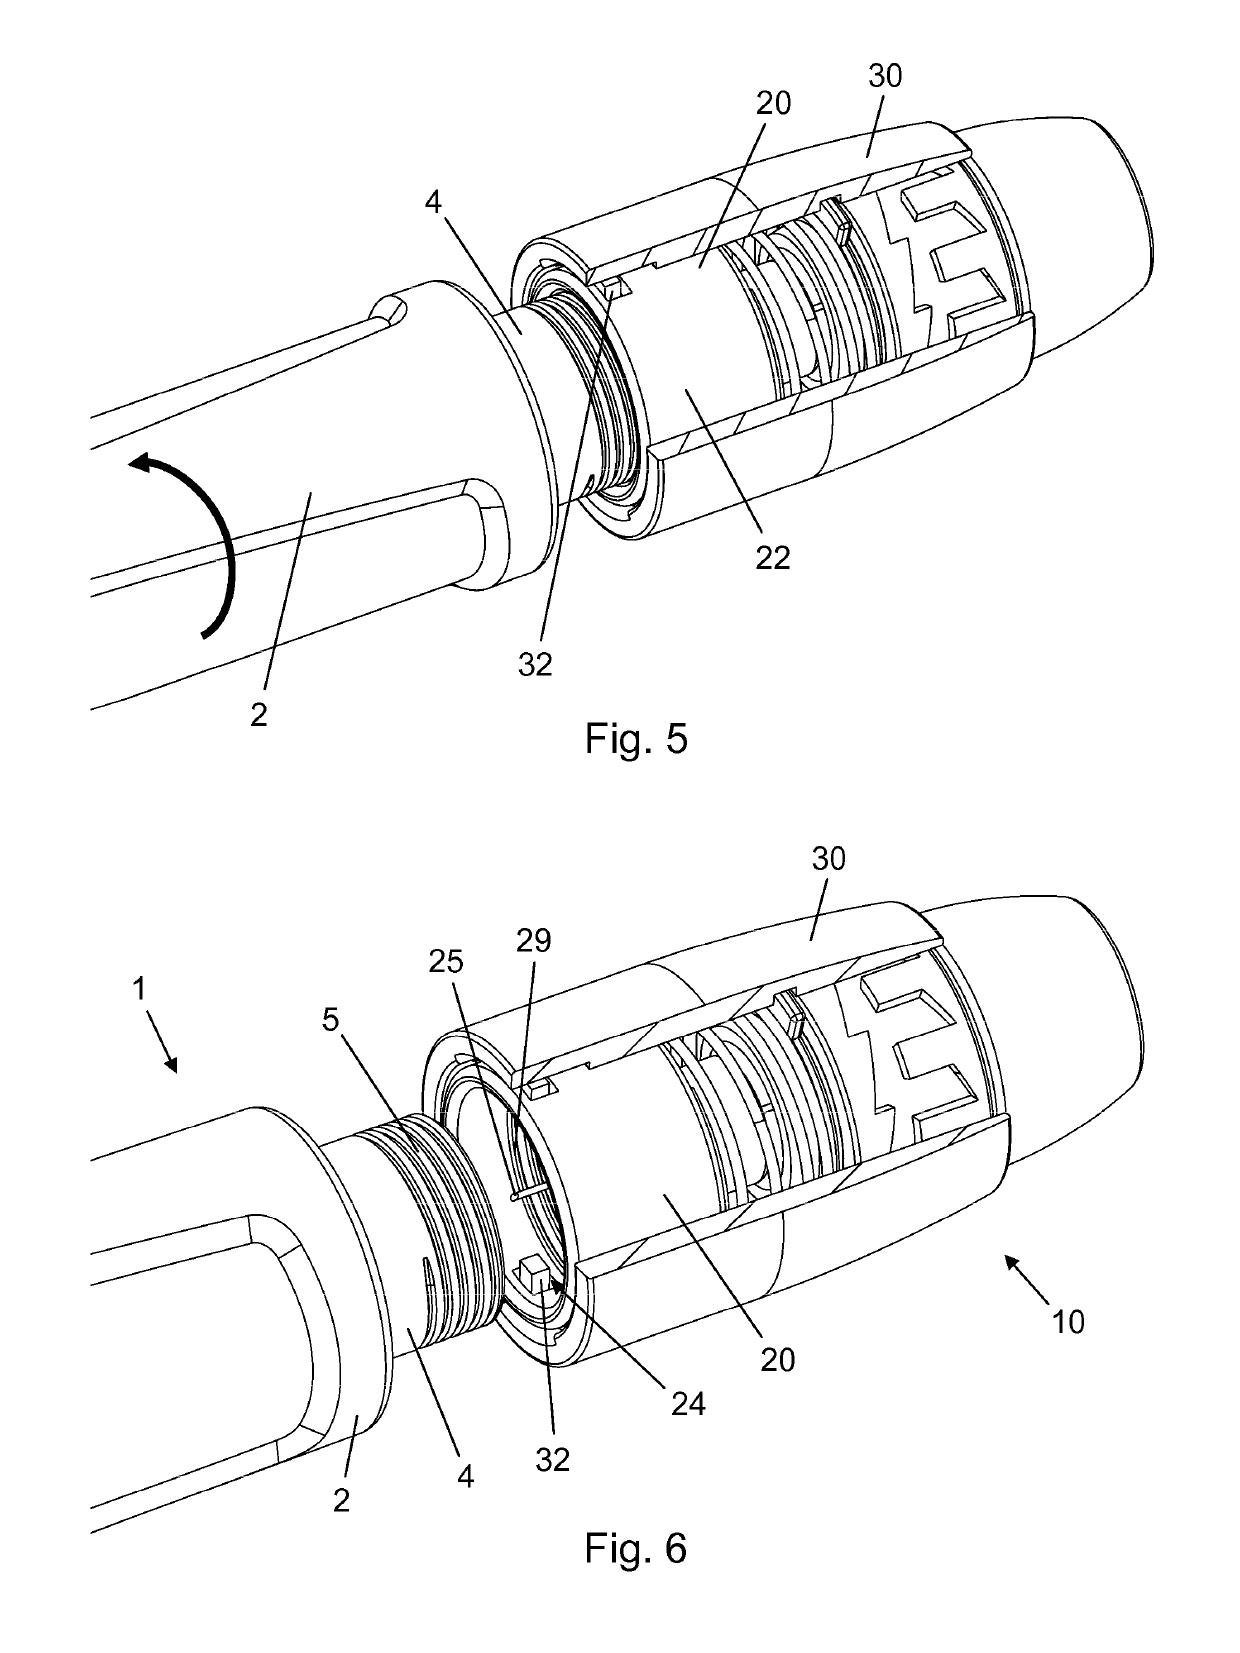 Needle unit for drug delivery device